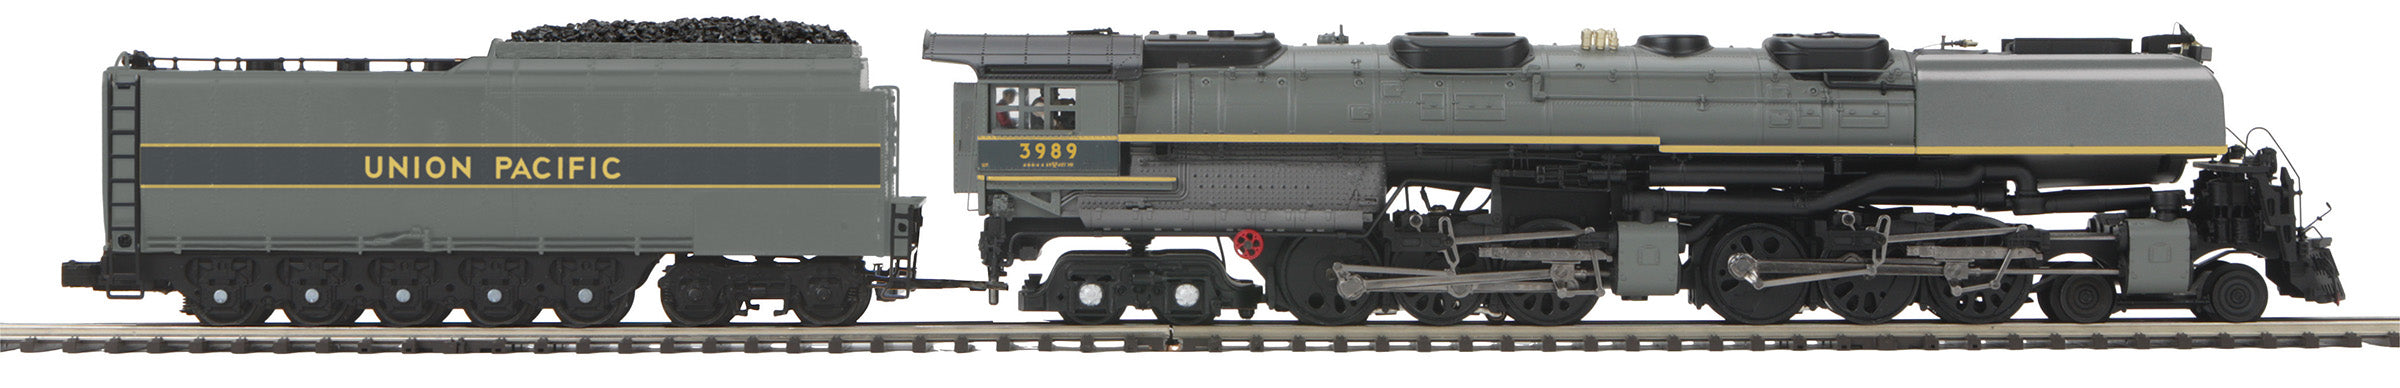 MTH 20-3894-1 - 4-6-6-4 Challenger Steam Engine "Union Pacific" #3989 w/ PS3 + Smoke Deflectors (Two-Tone Gray w/ Yellow Stripes - Coal Tender)